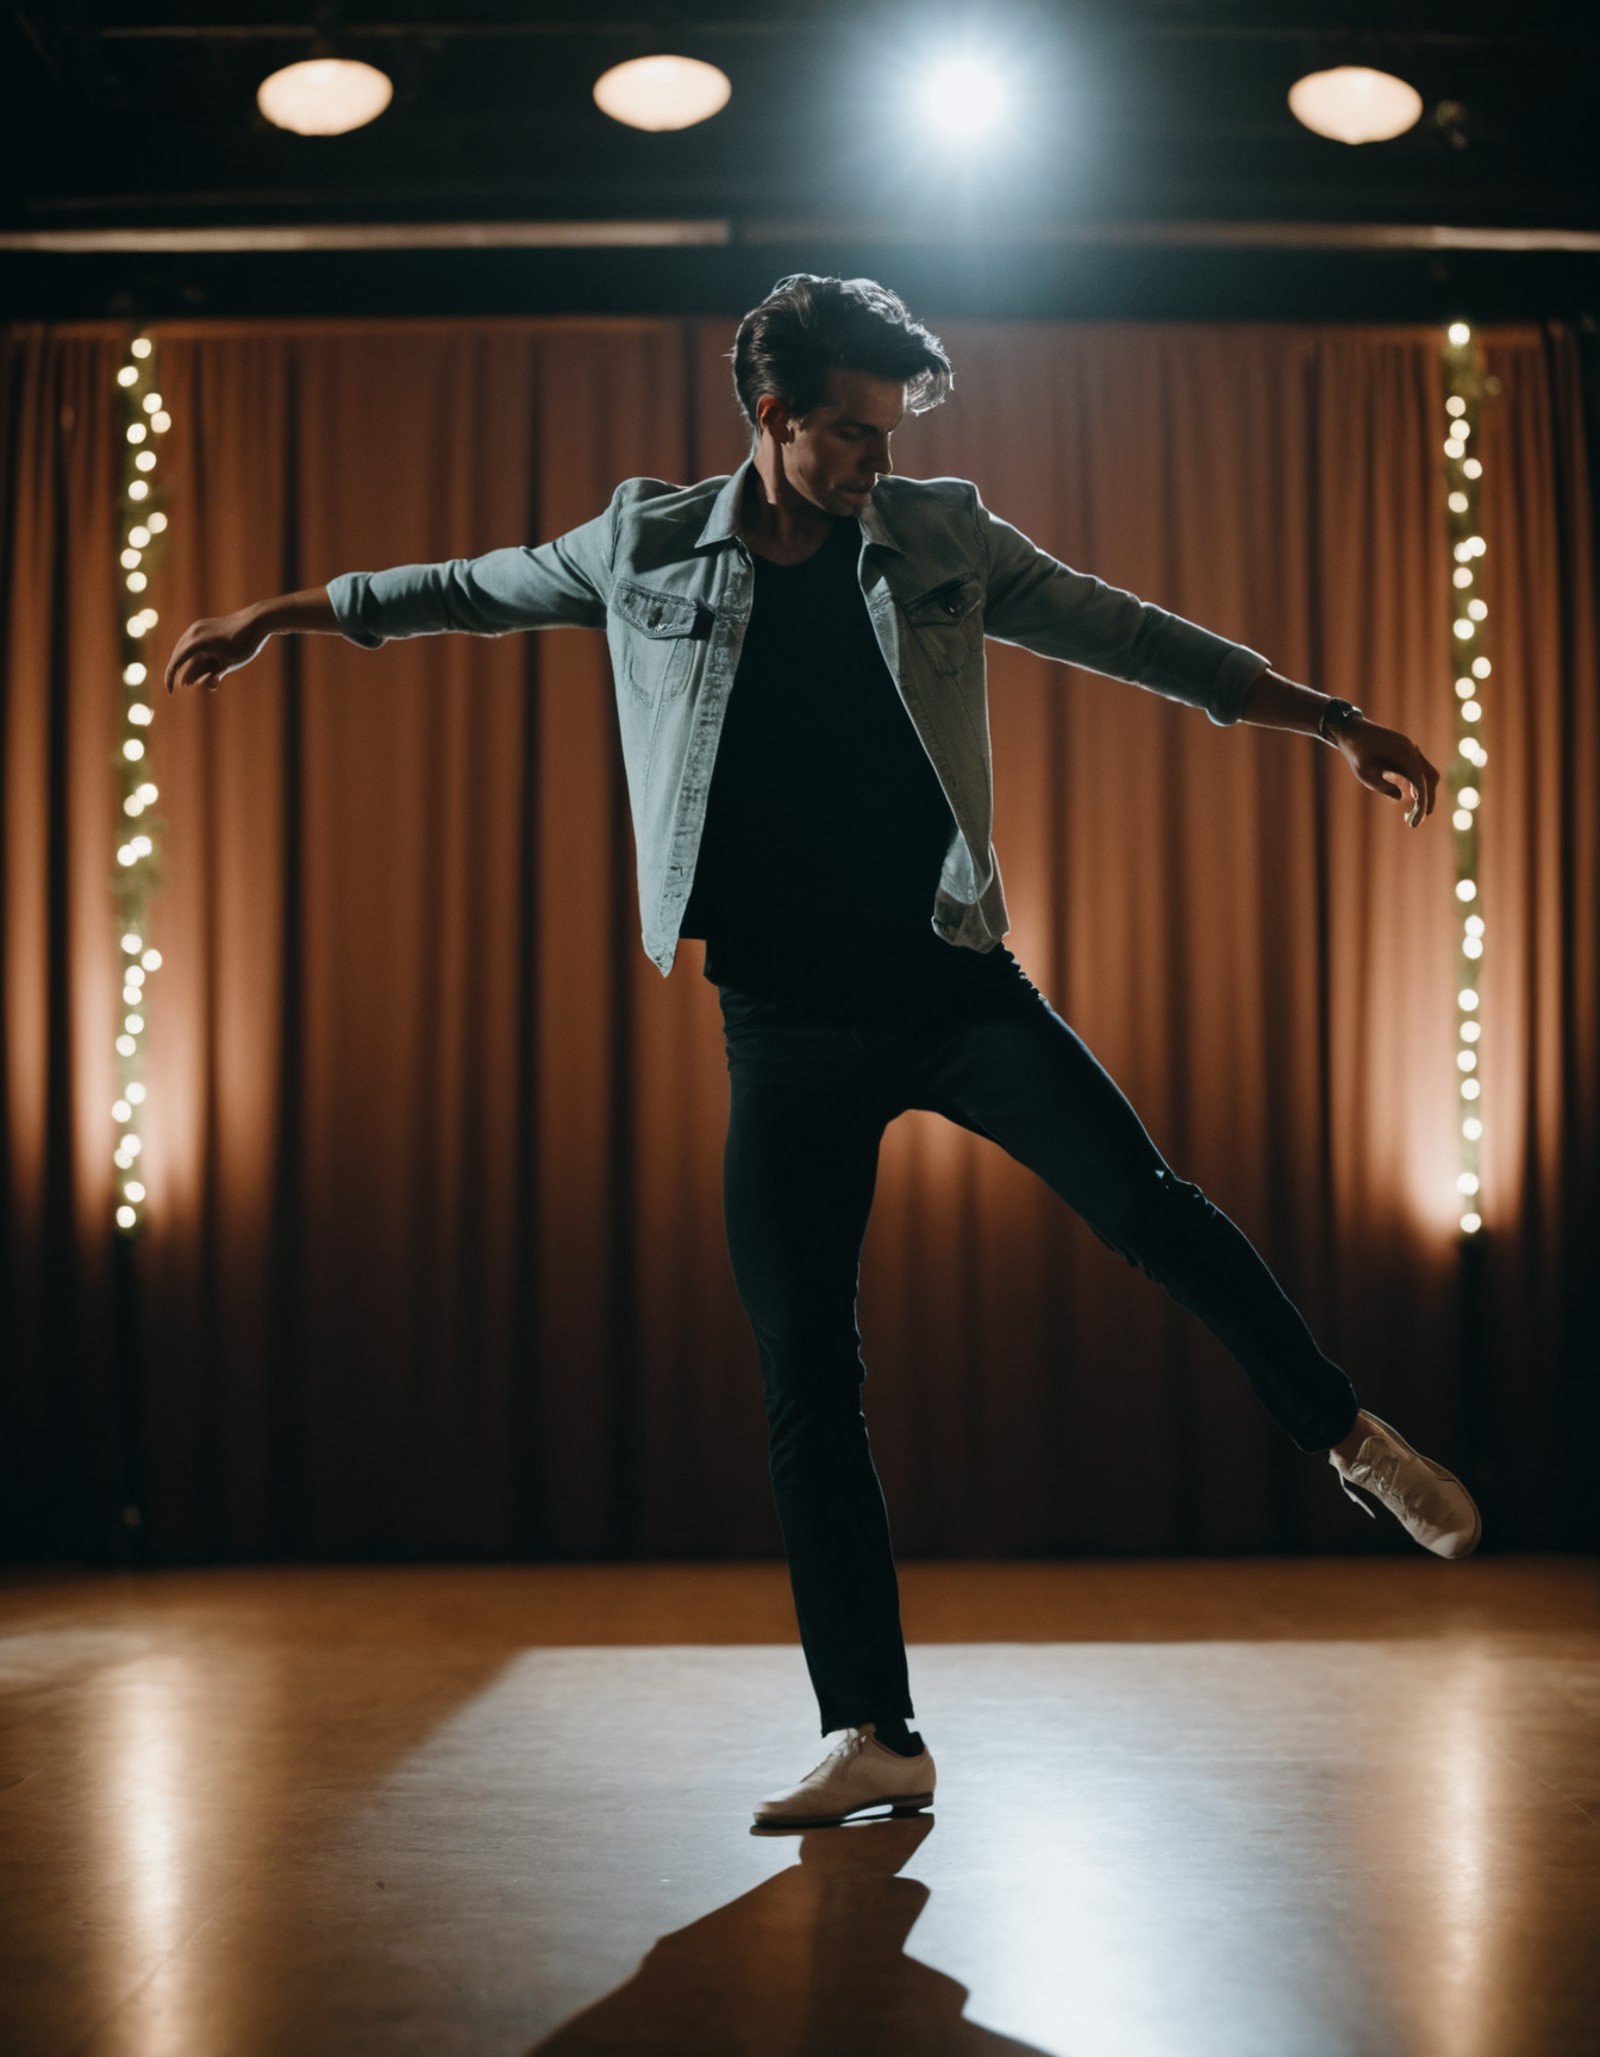 cinematic photo full height frontal shot of a man dancing . 35mm photograph, film, bokeh, professional, 4k, highly detailed